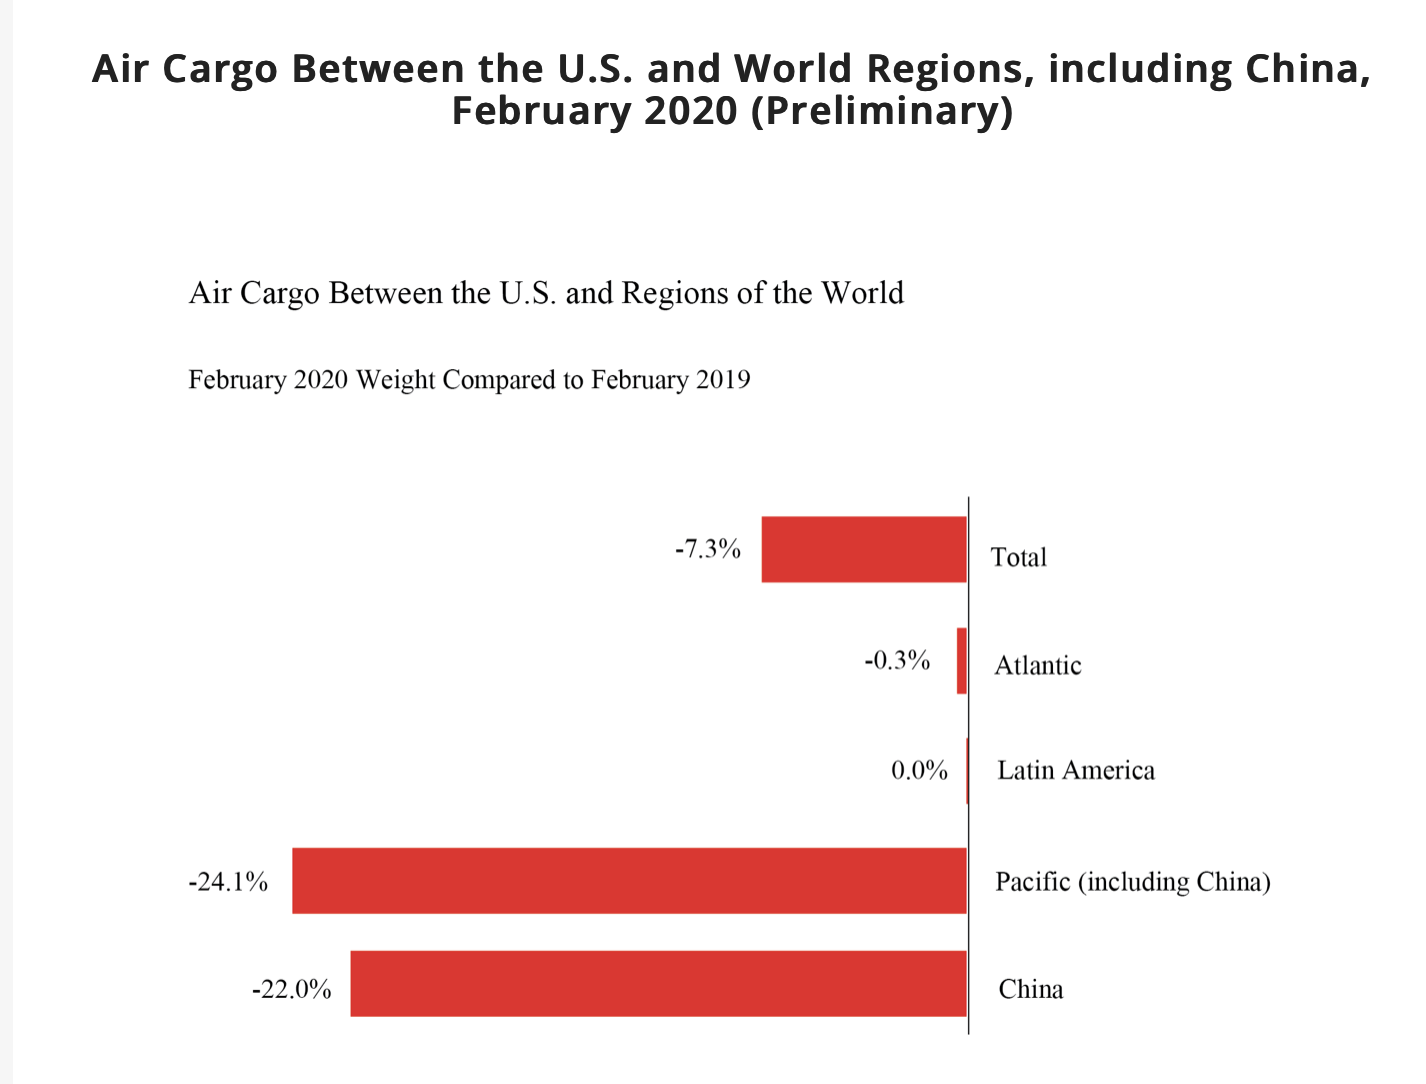 US air cargo data shows 7.3% decline in February